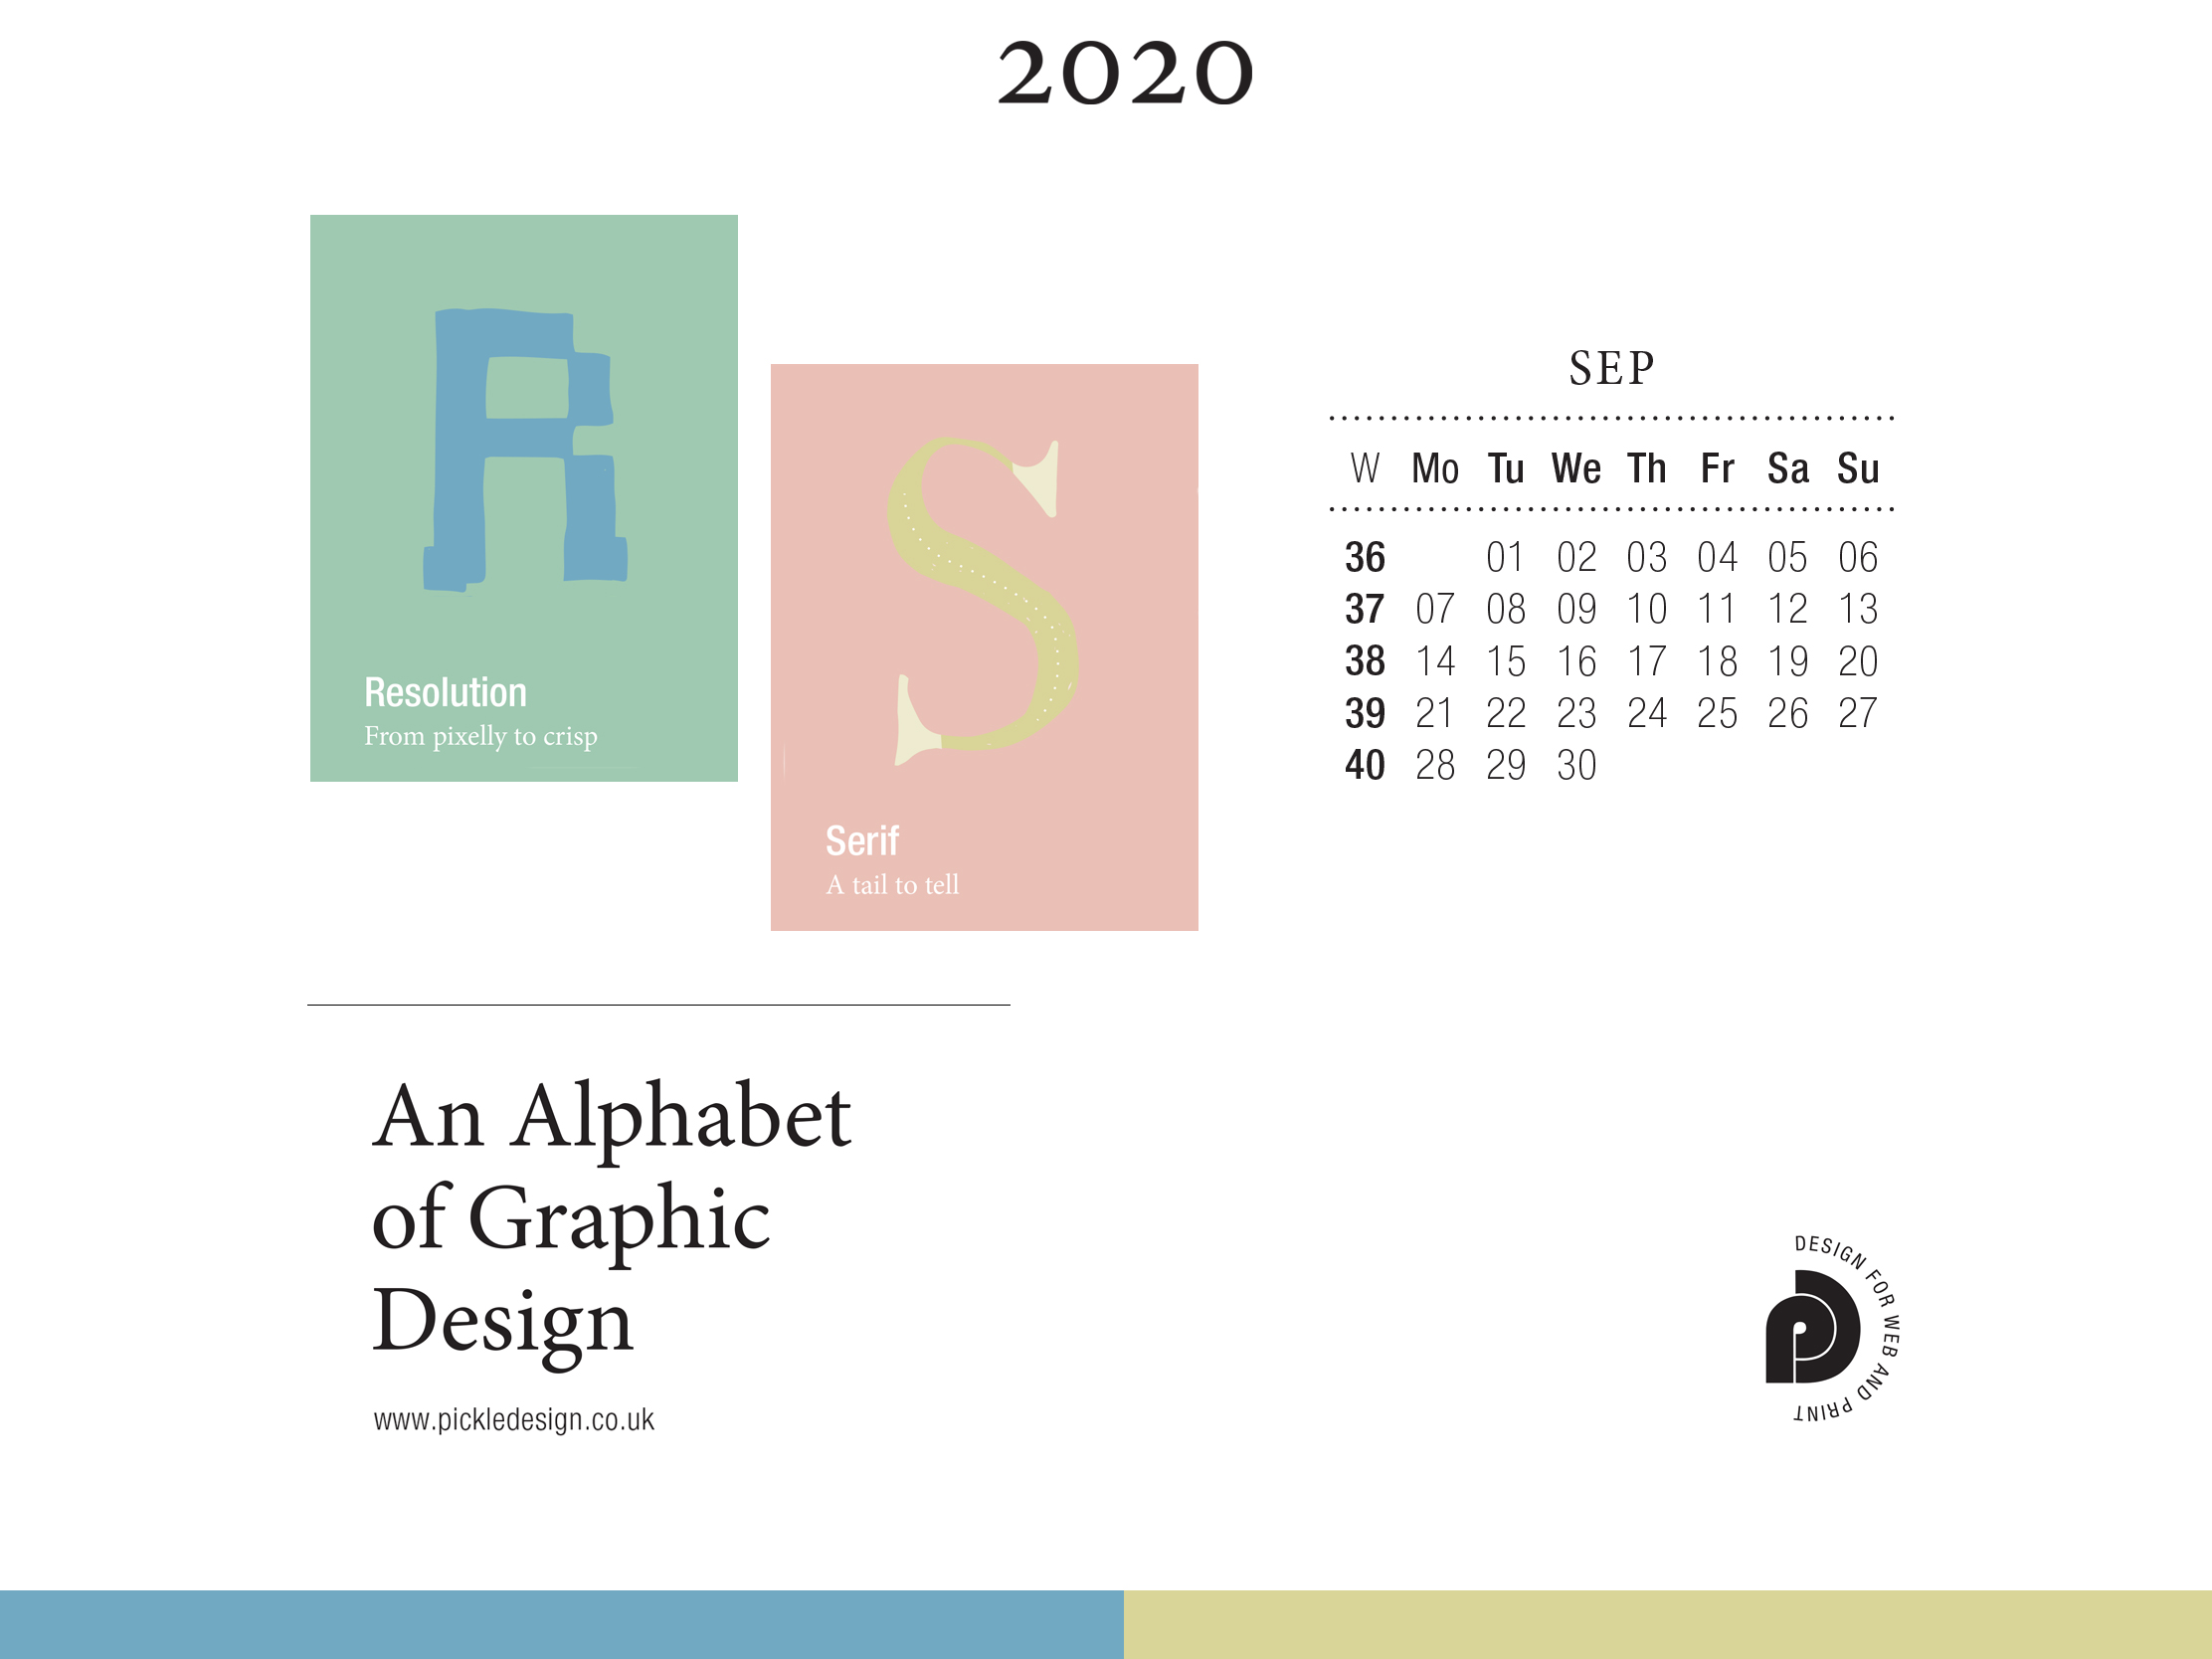 Download the month of September from our Alphabet of Graphic Design calendar for free for your mobile, tablet and desktop computer background